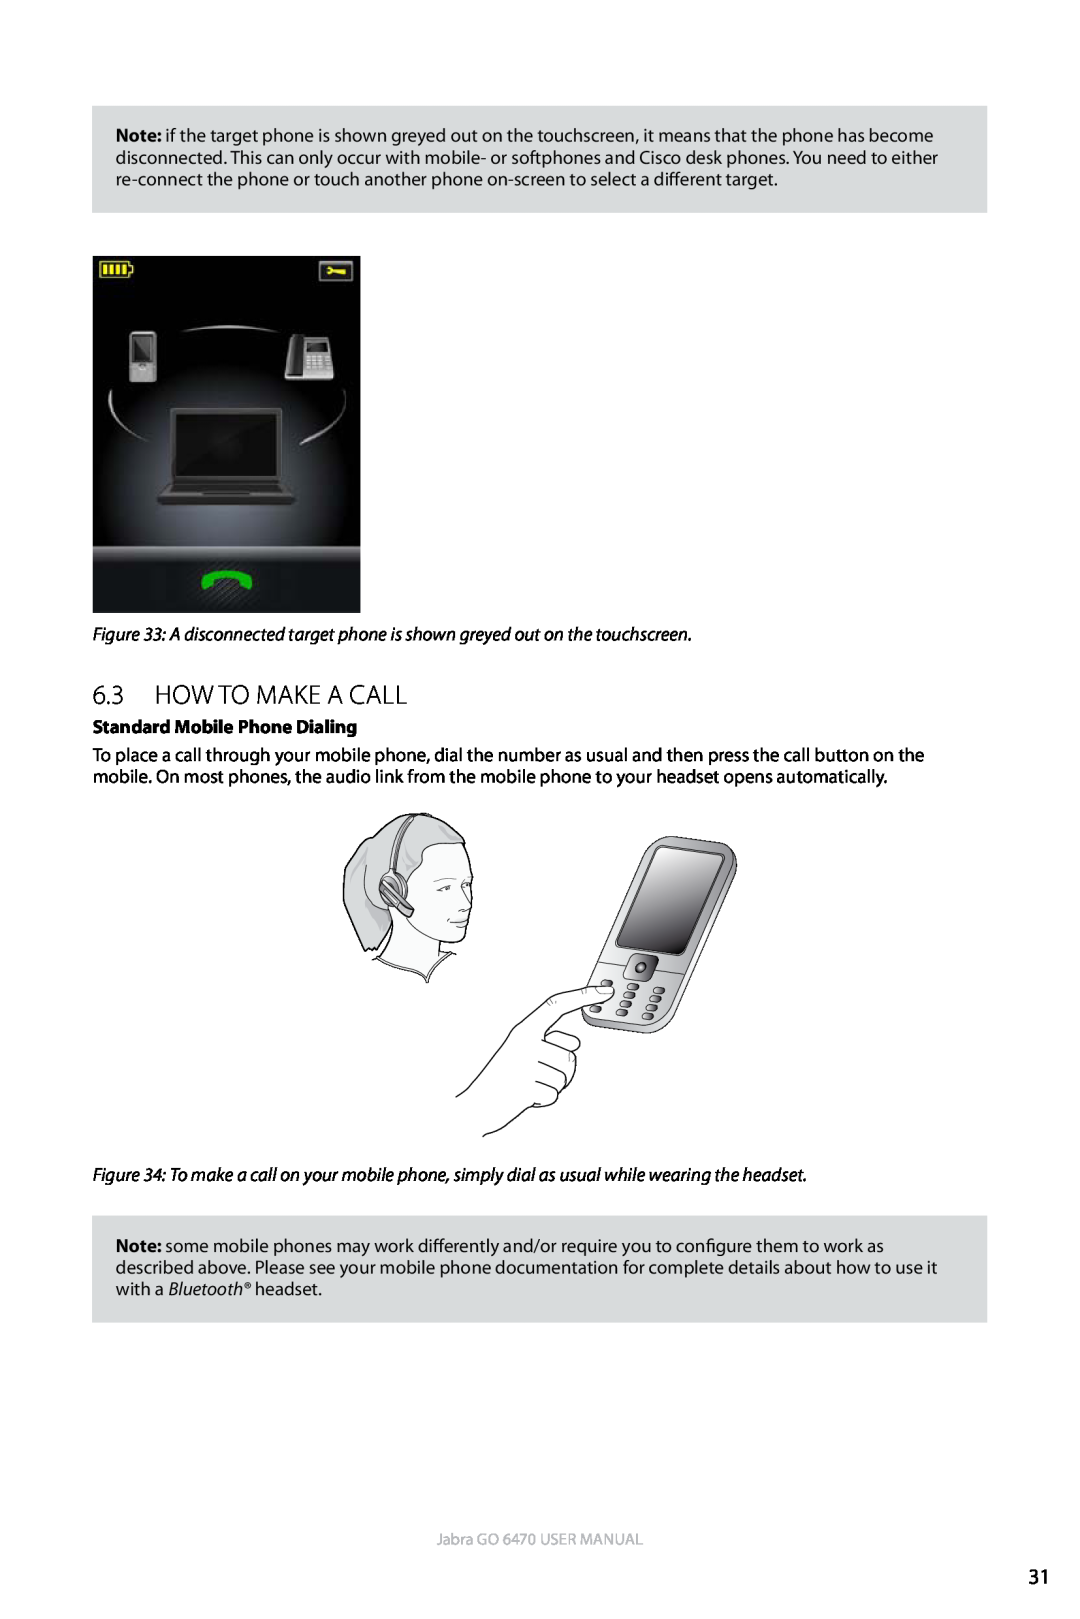 Jabra GO 6470 user manual 6.3How to Make a Call, Standard Mobile Phone Dialing 